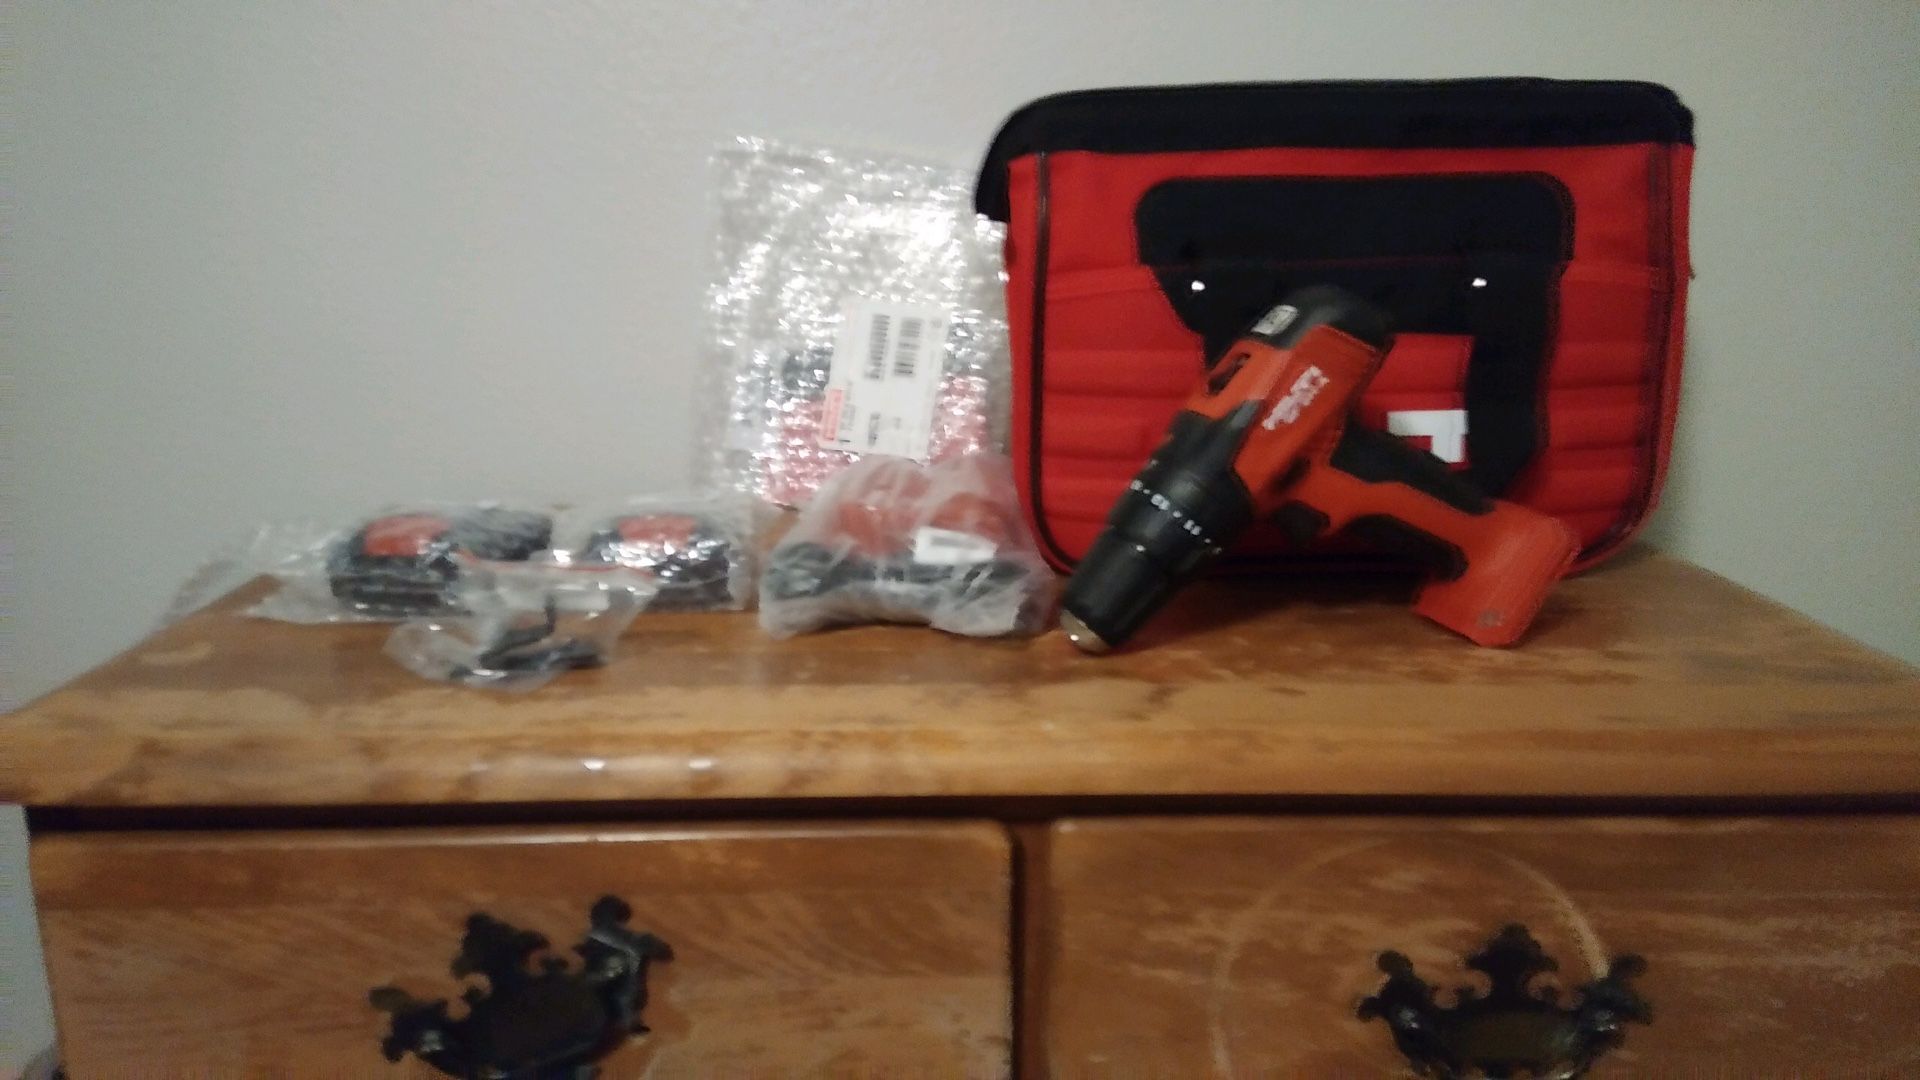 Hilti 12 v drill 2 batteries charger and bag